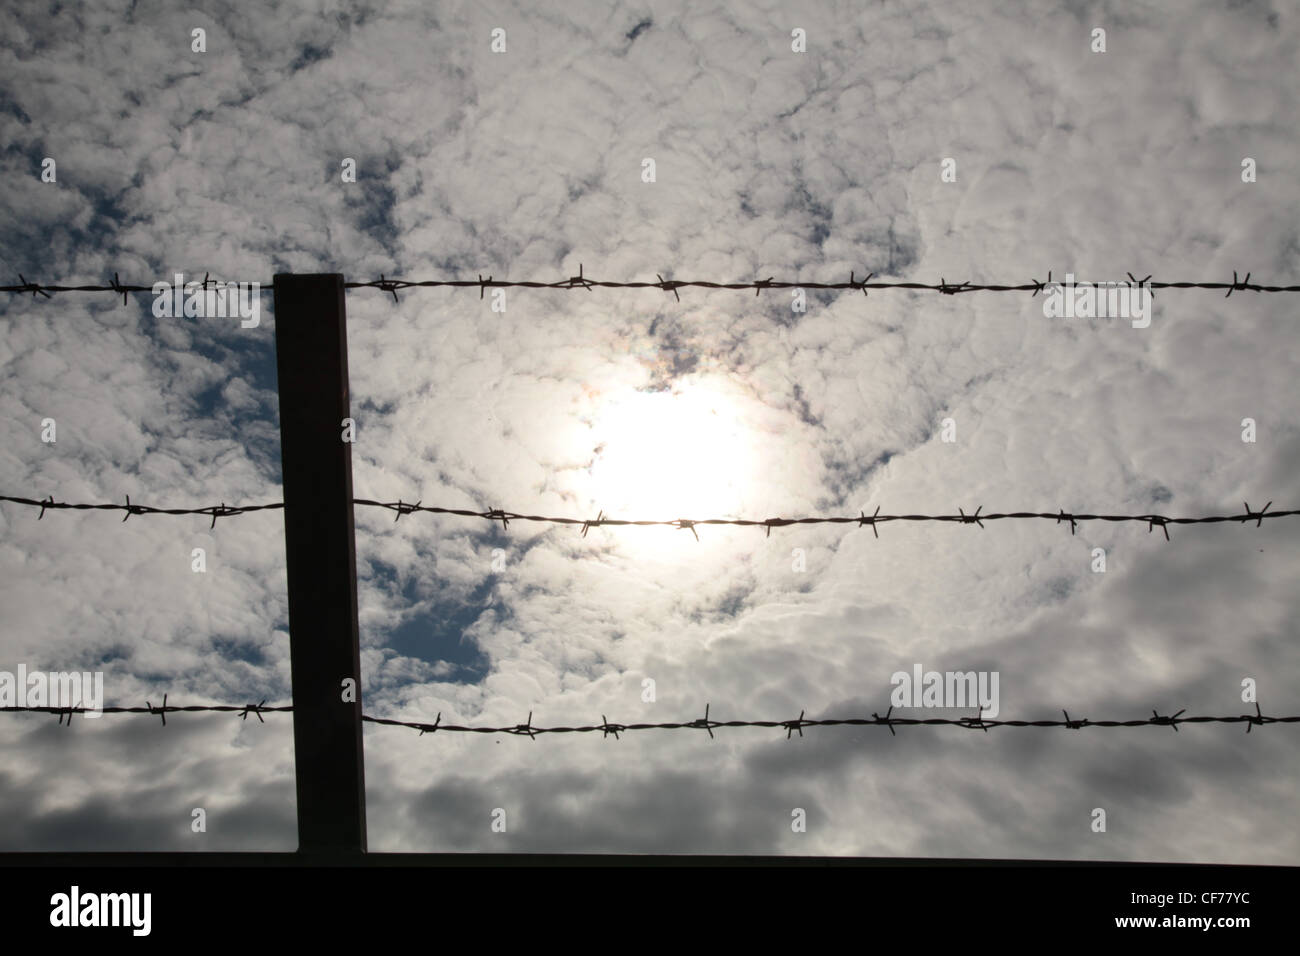 Szene mit Stacheldrahtzaun in diffusem Licht, Scene with diffuse light and barbed wire fence Stock Photo